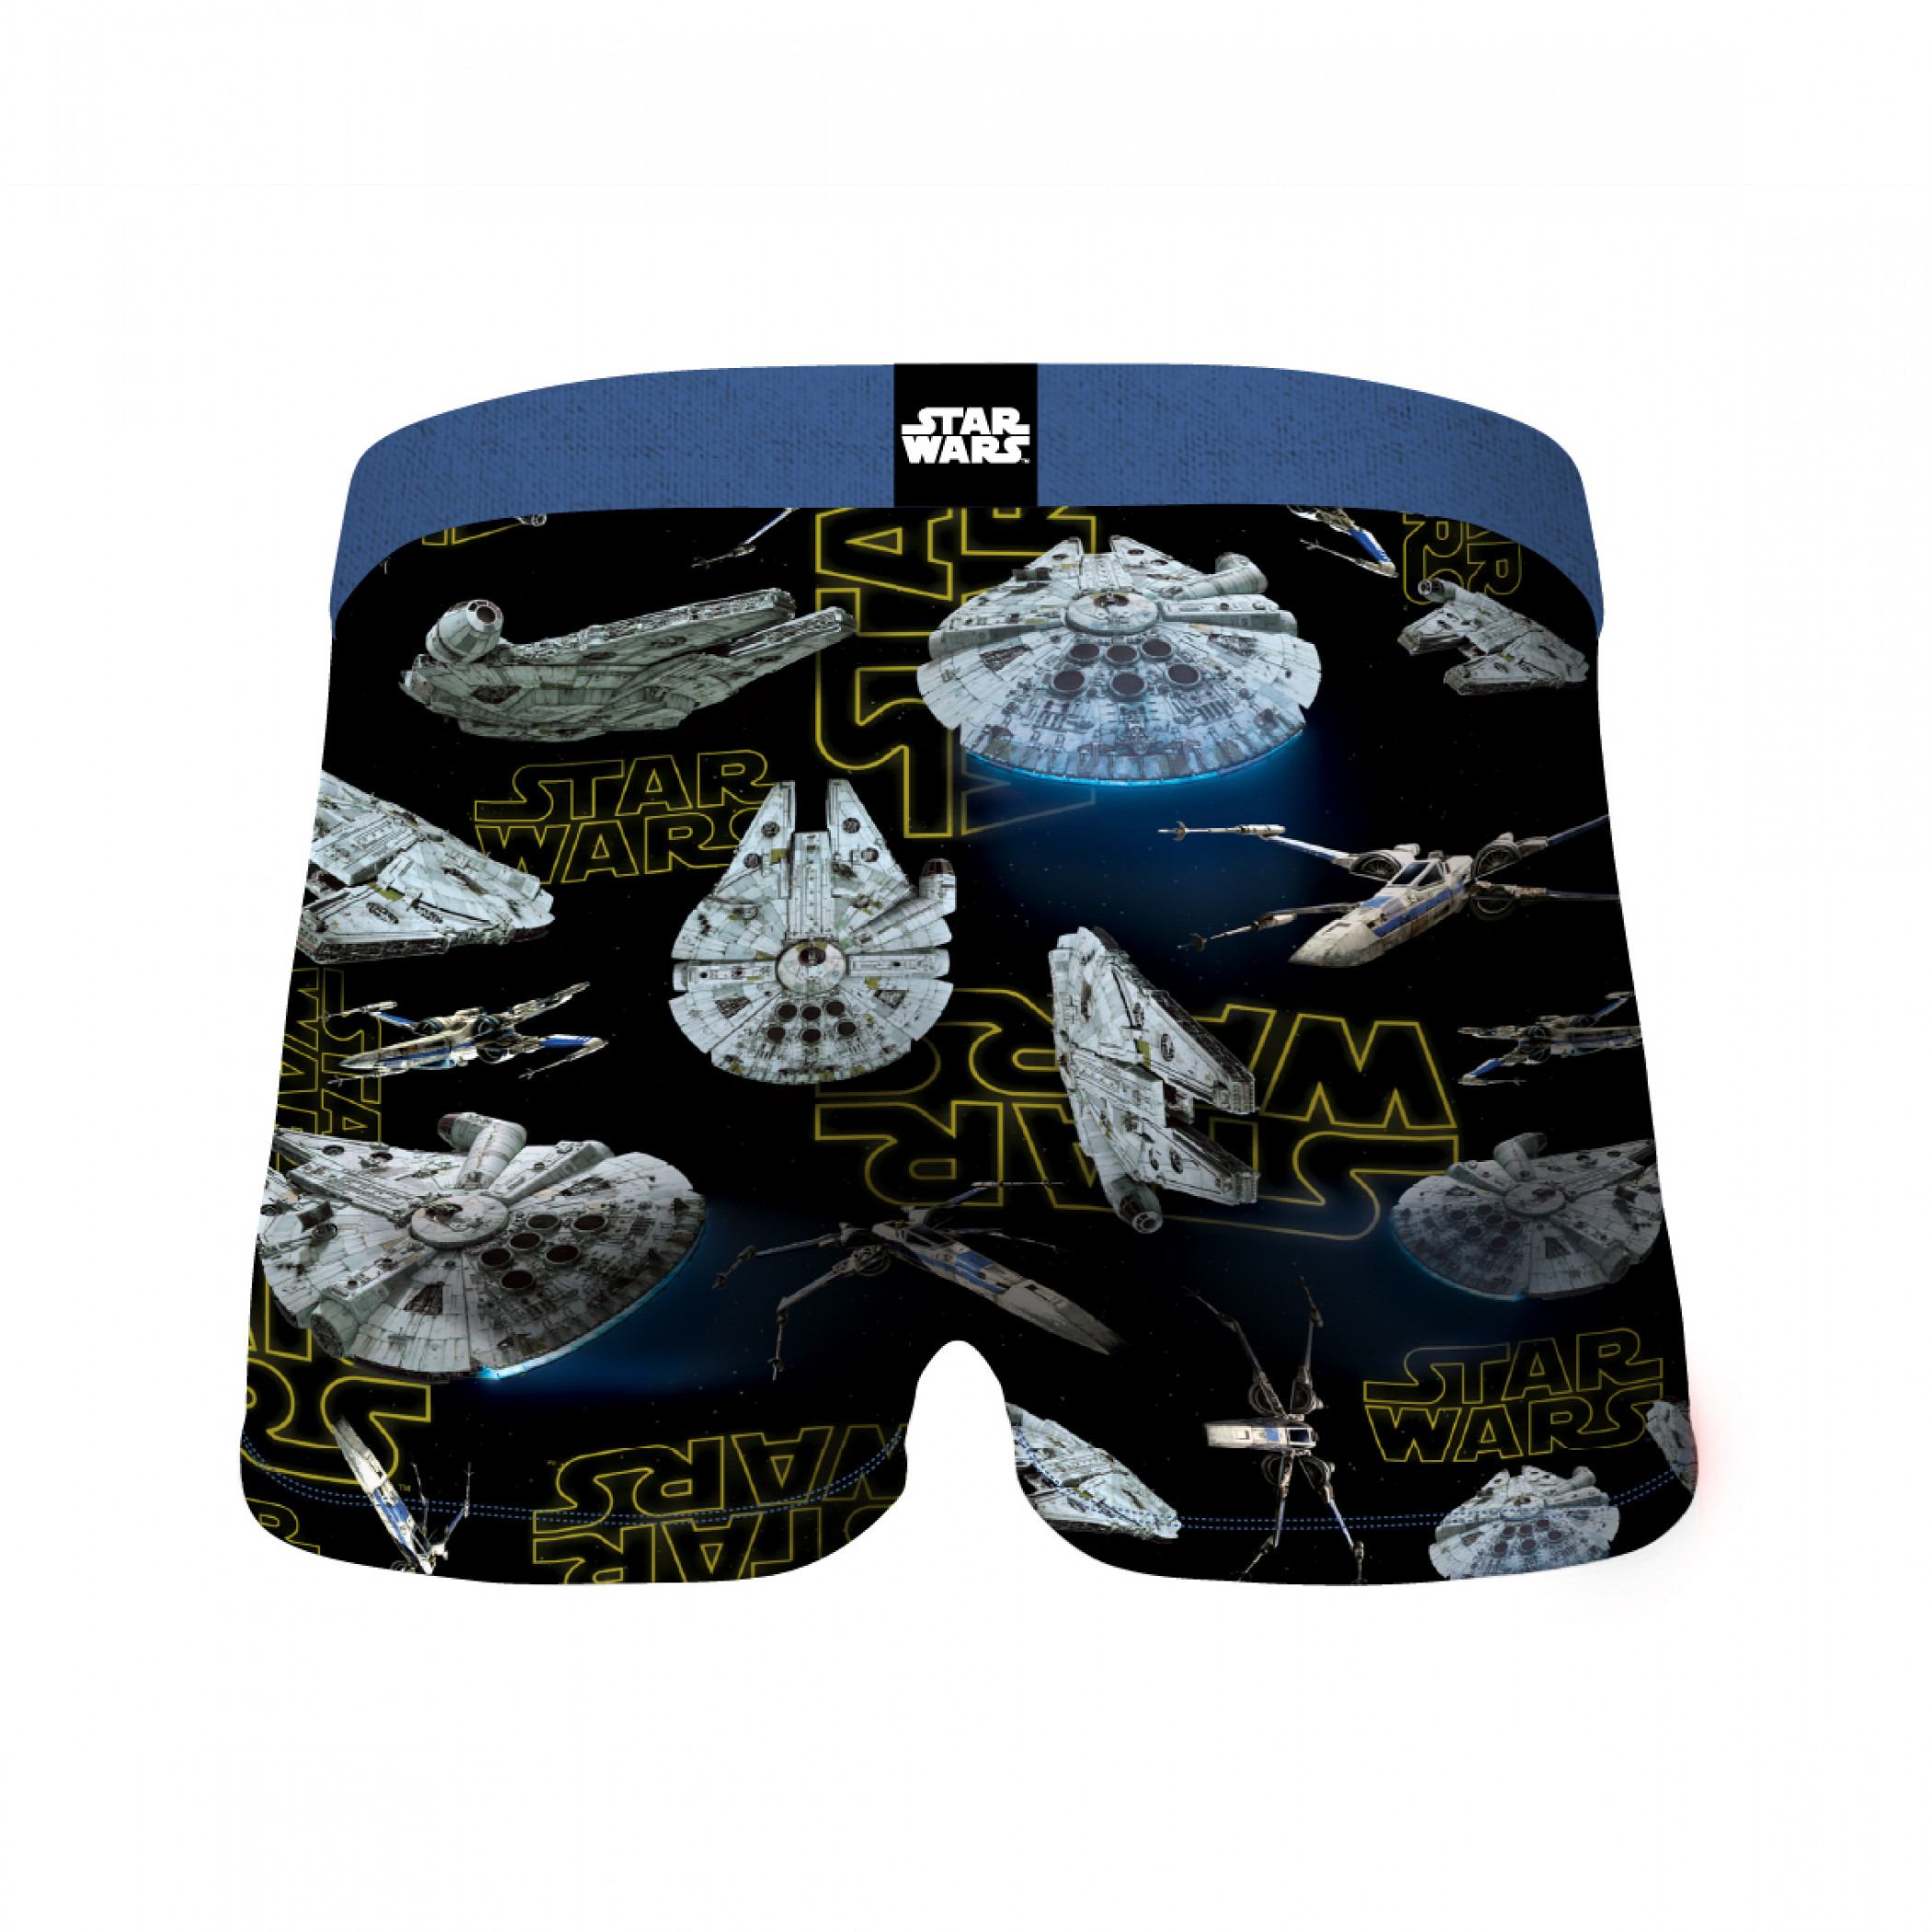 Star Wars Darth Vader and Millennium Falcon 2-Pack of Men's Crazy Boxer Briefs